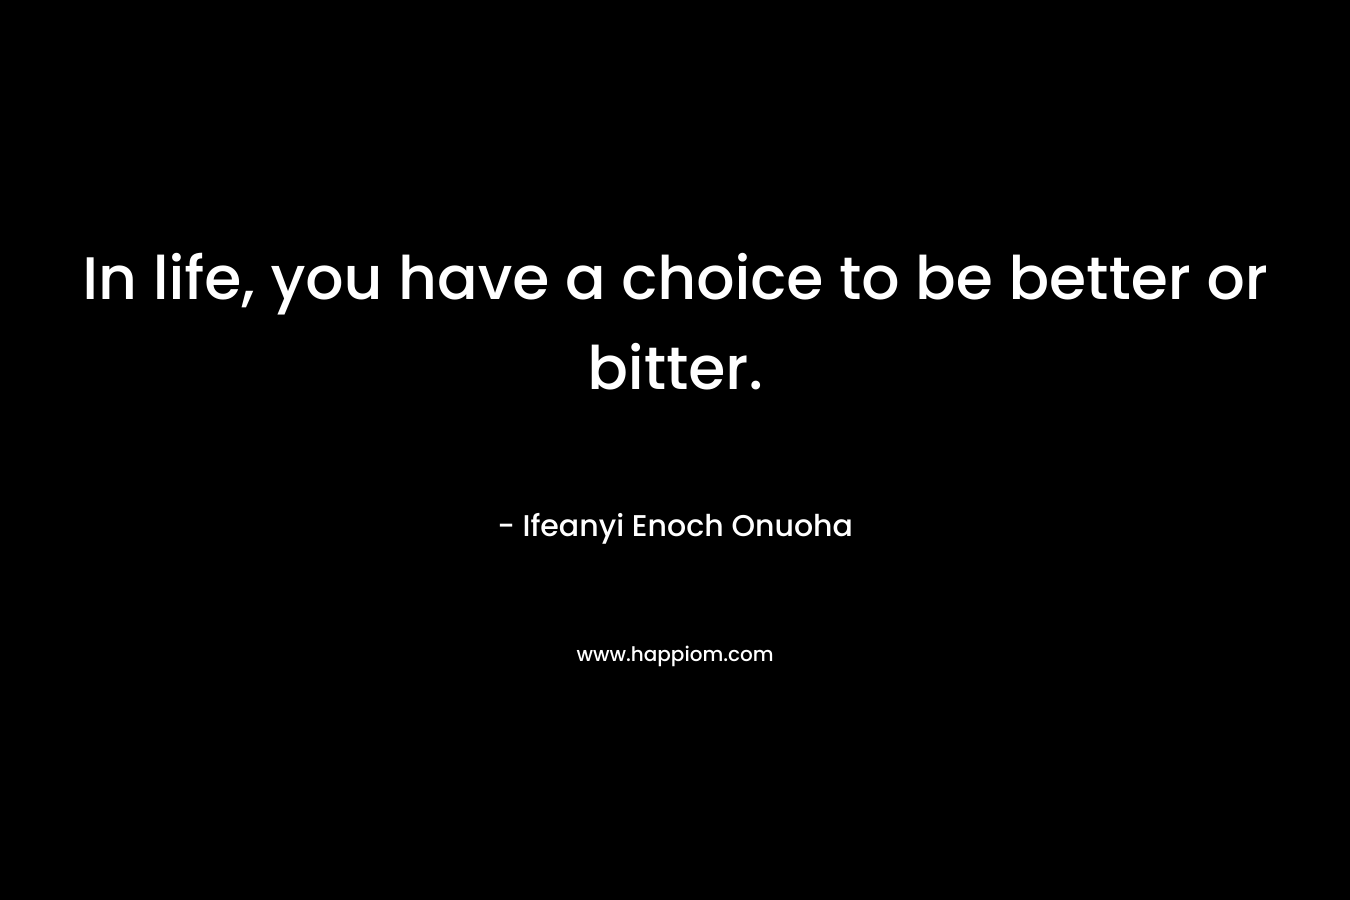 In life, you have a choice to be better or bitter.